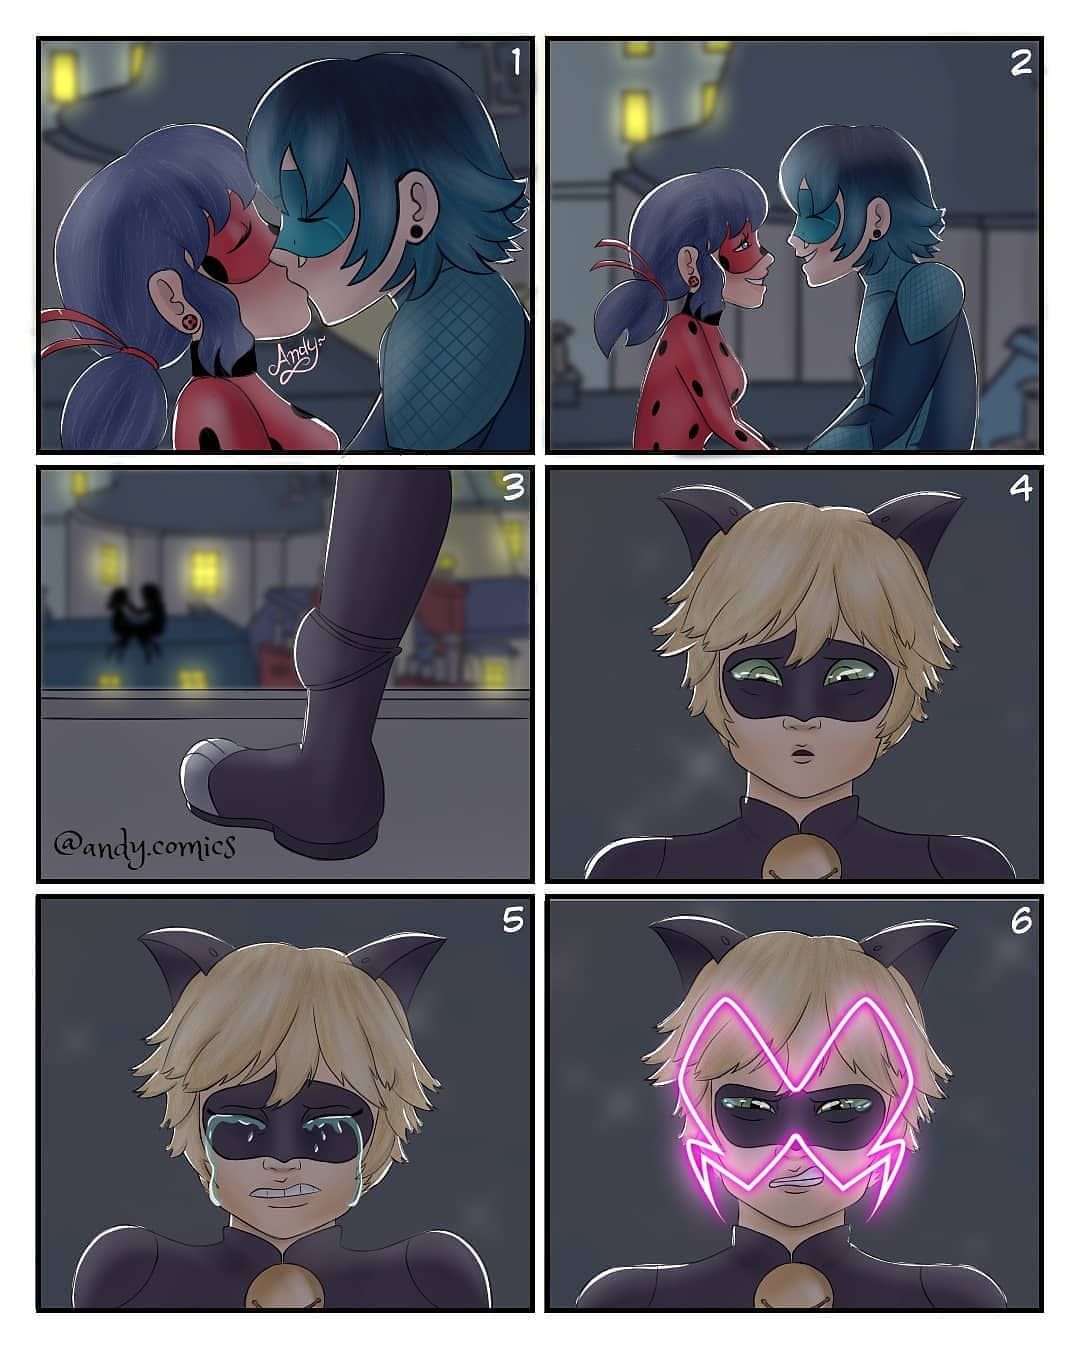 Comment your theories on why you think Chat Noir gets